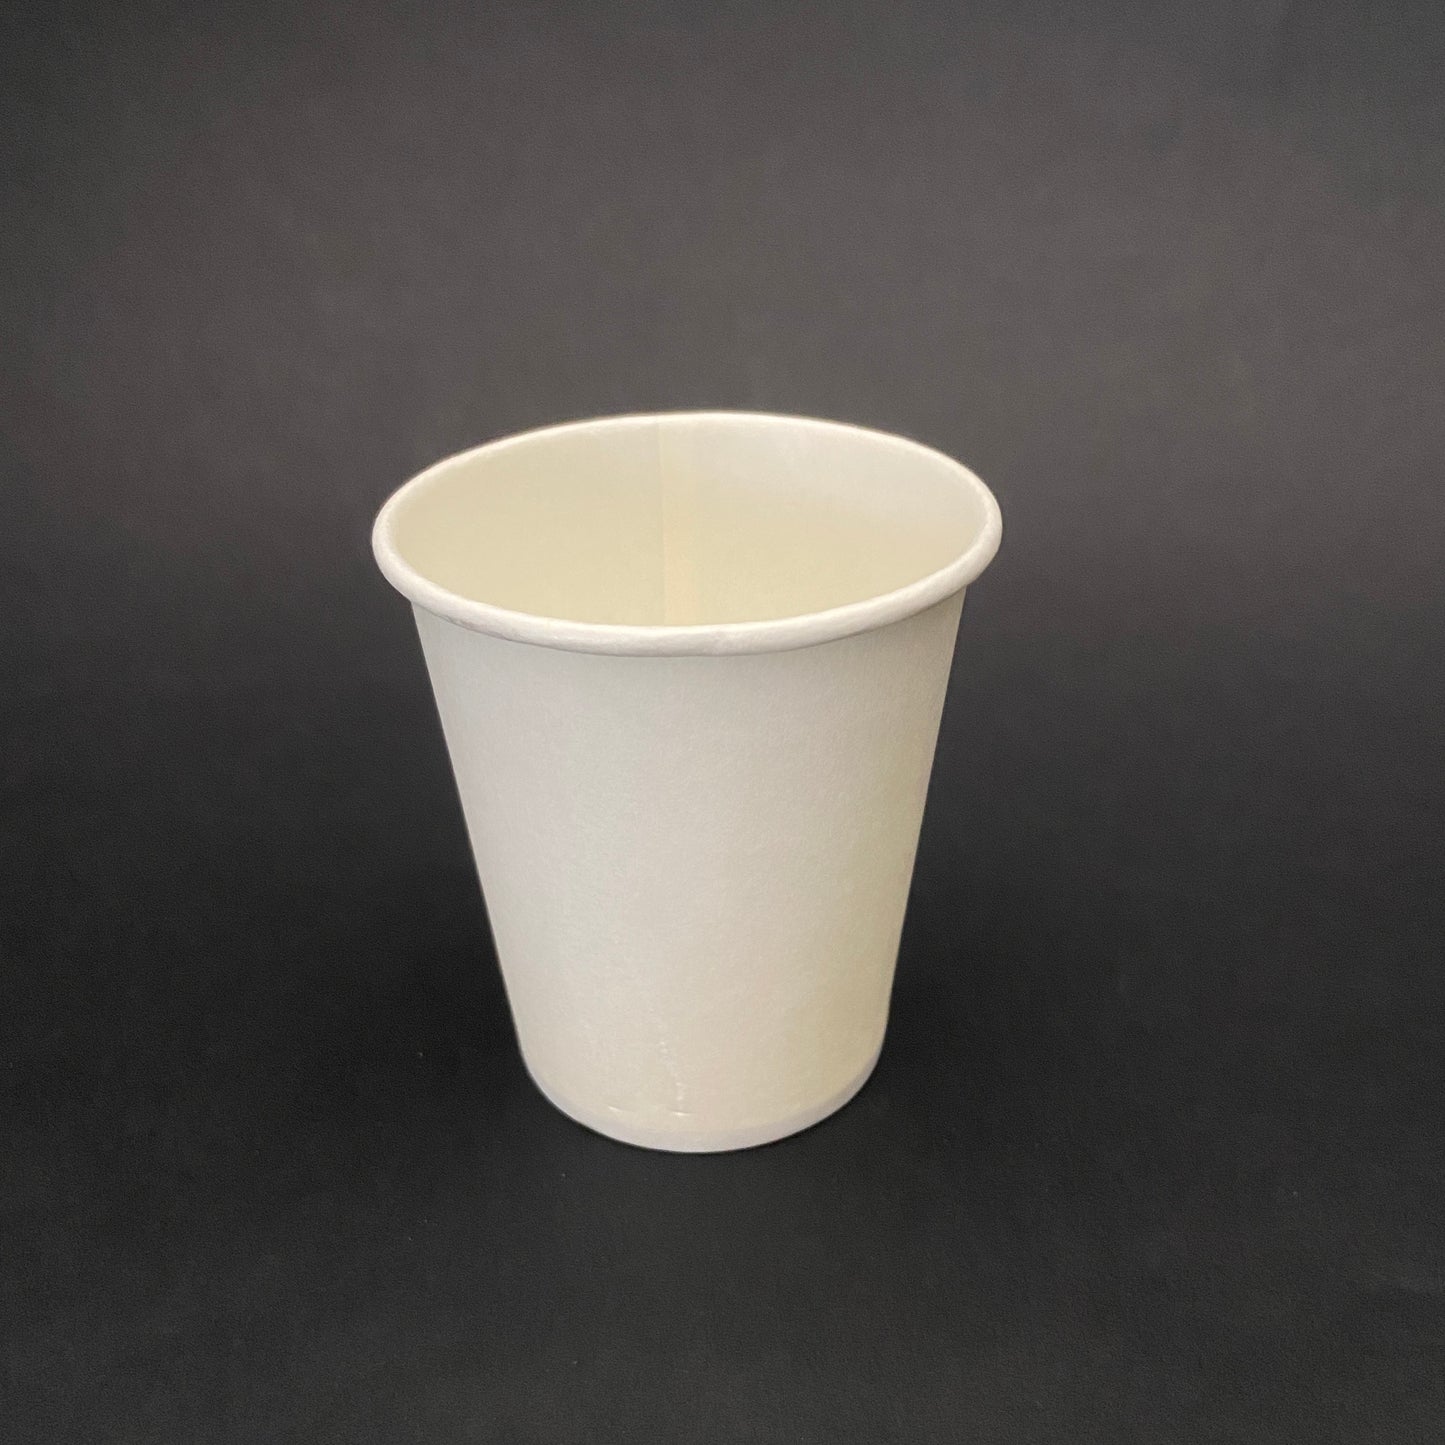 150ml white paper rinse cups - mmtattoo supplies